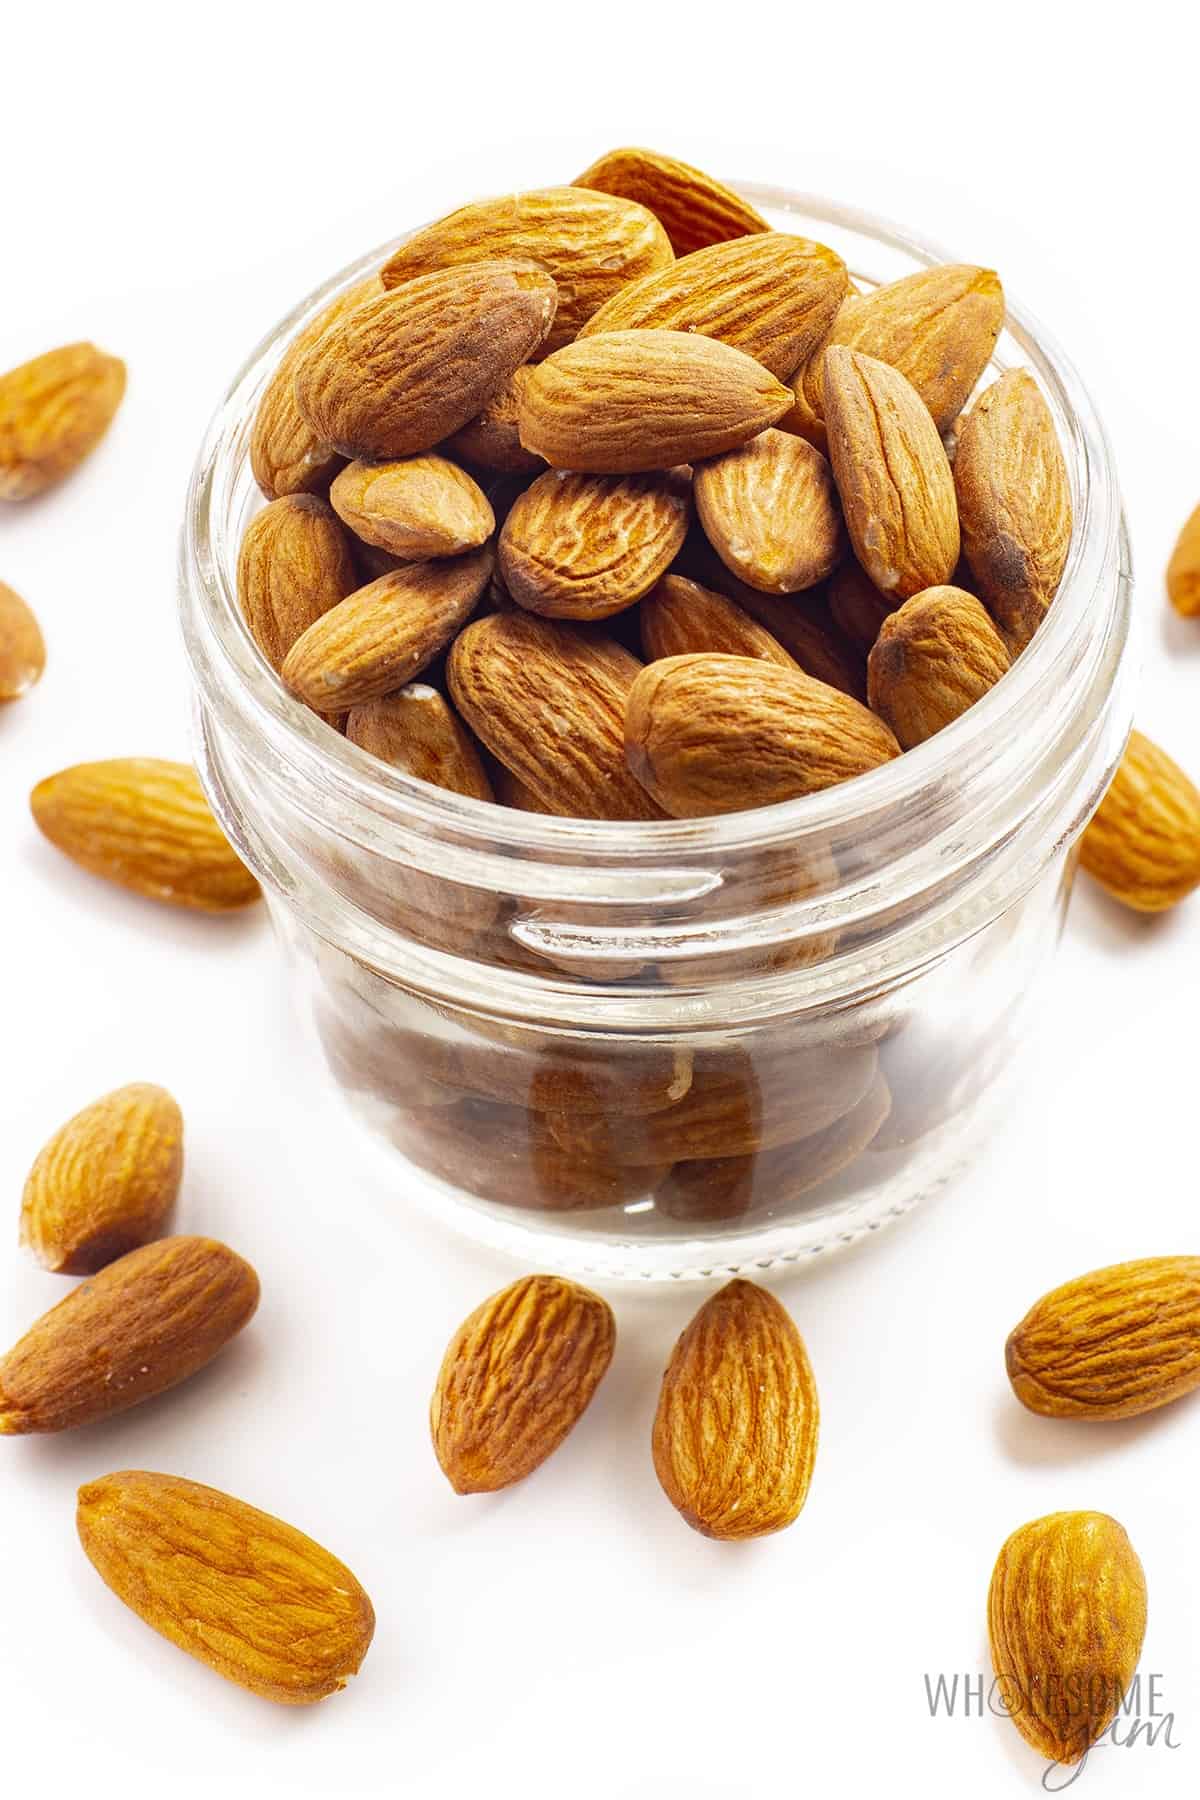 Are carbs in almonds high? These raw almonds are low in carbs